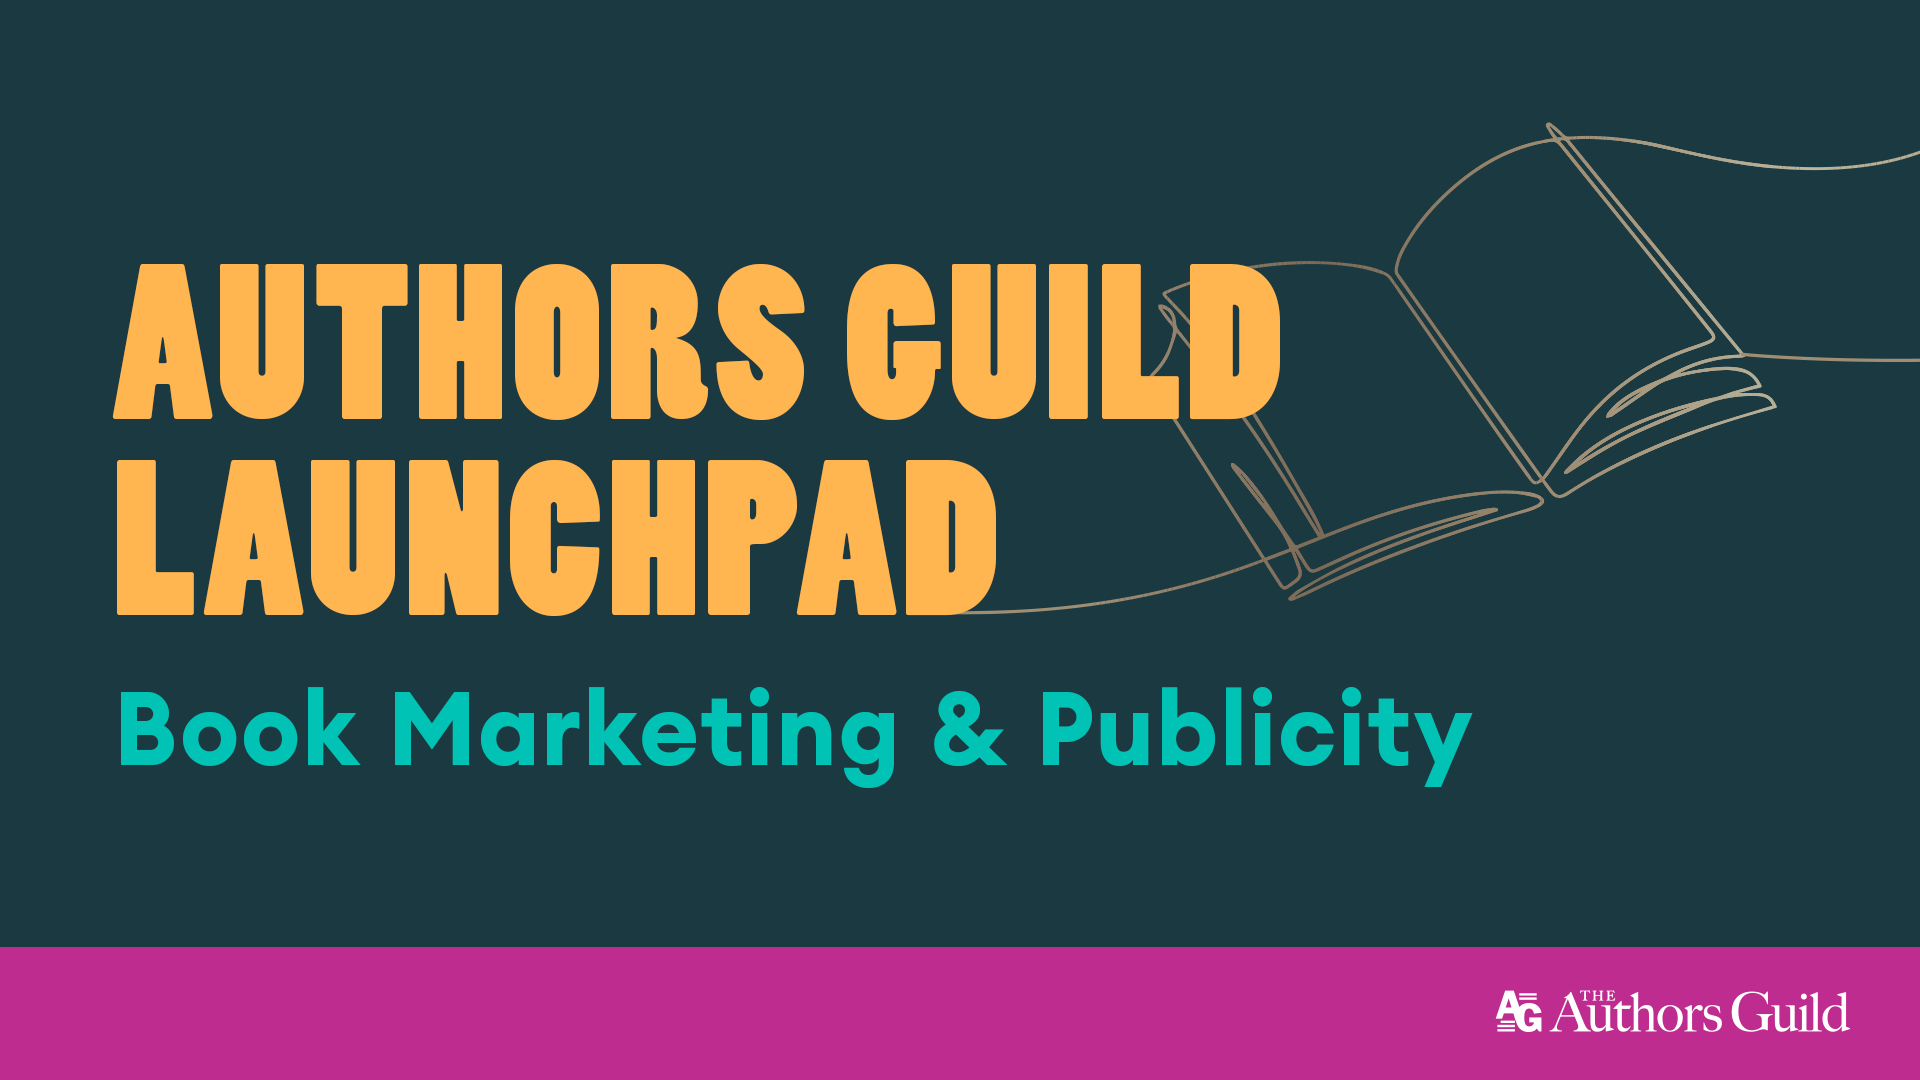 Authors Guild Launchpad Book Marketing & Publicity